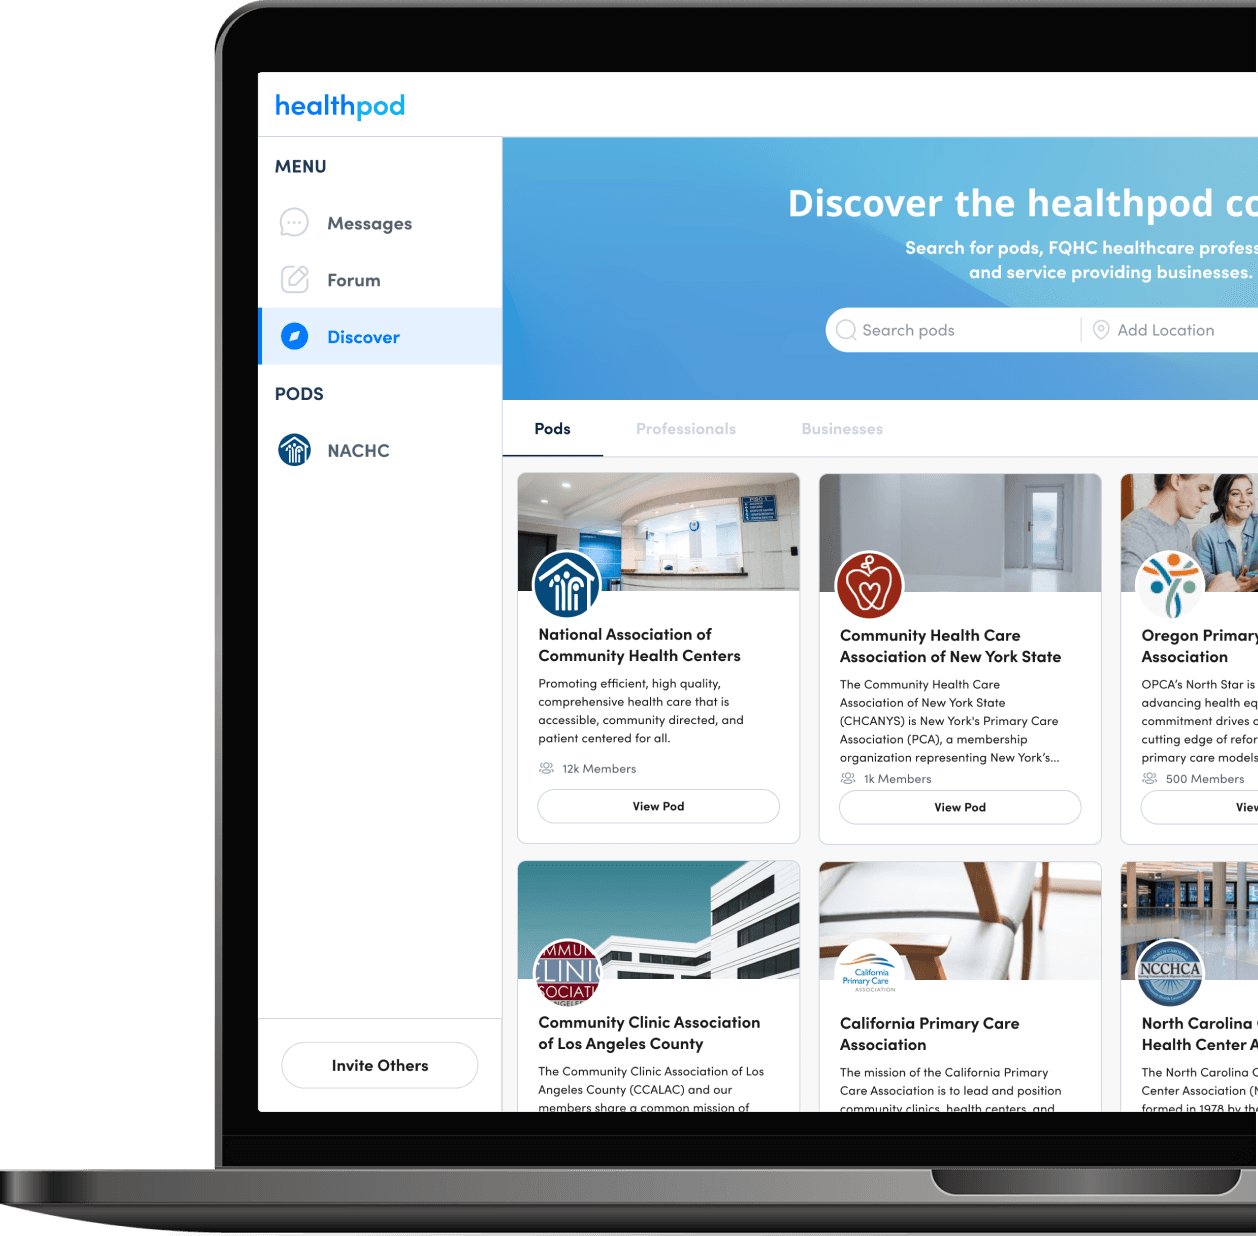 Sign up for Healthpod